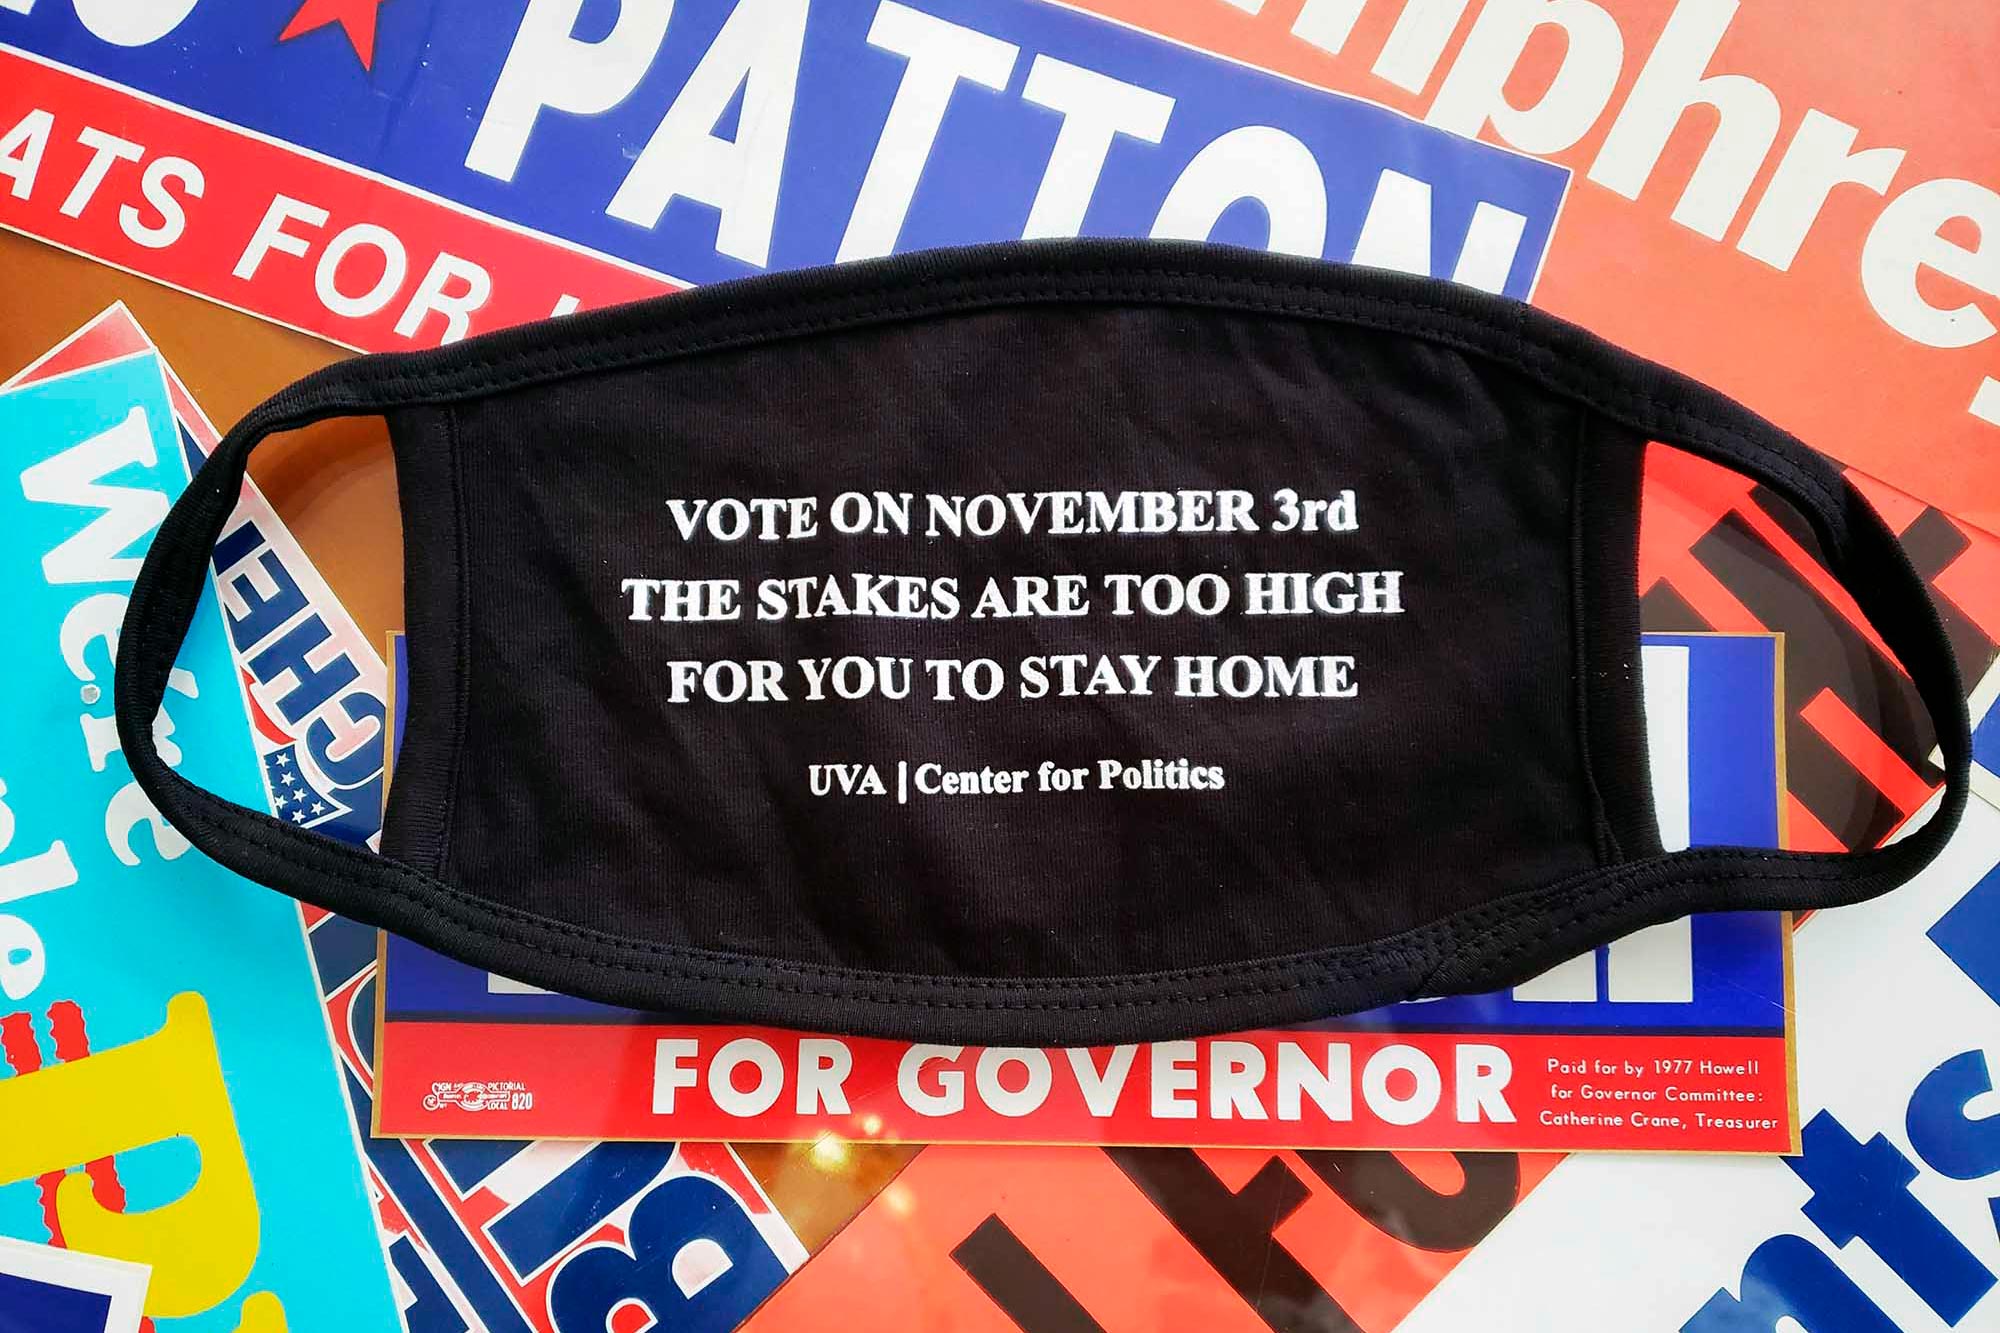 Vote on November 3rd. The stakes are too high for you to stay home. UVA Center for Politics.